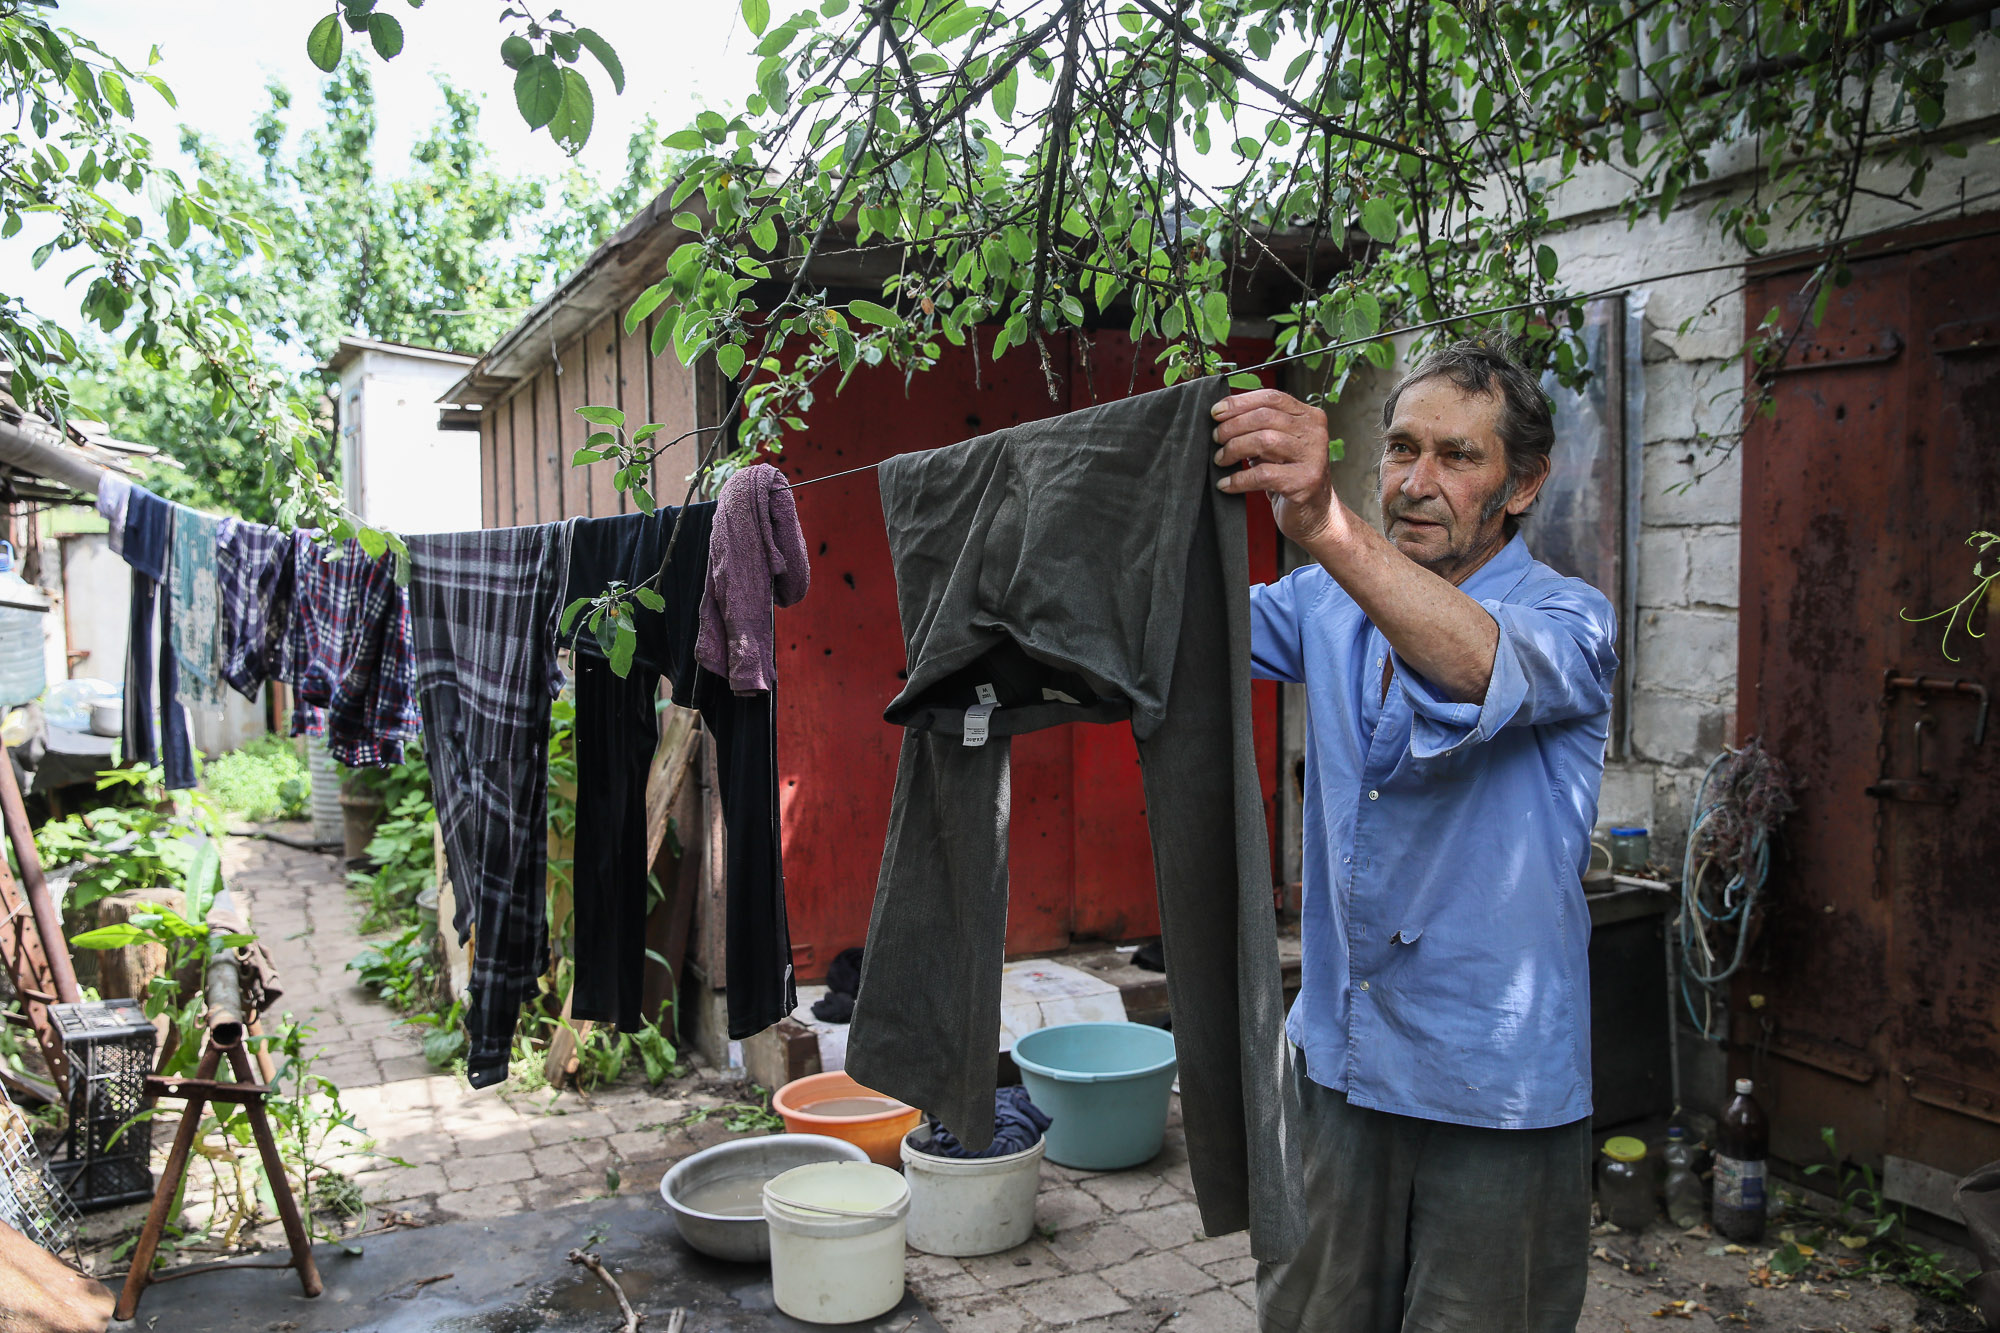 Oleksandr Suprun, a local civilian, hangs out his washing at his home in the town of Opytne on June 12, 2019.